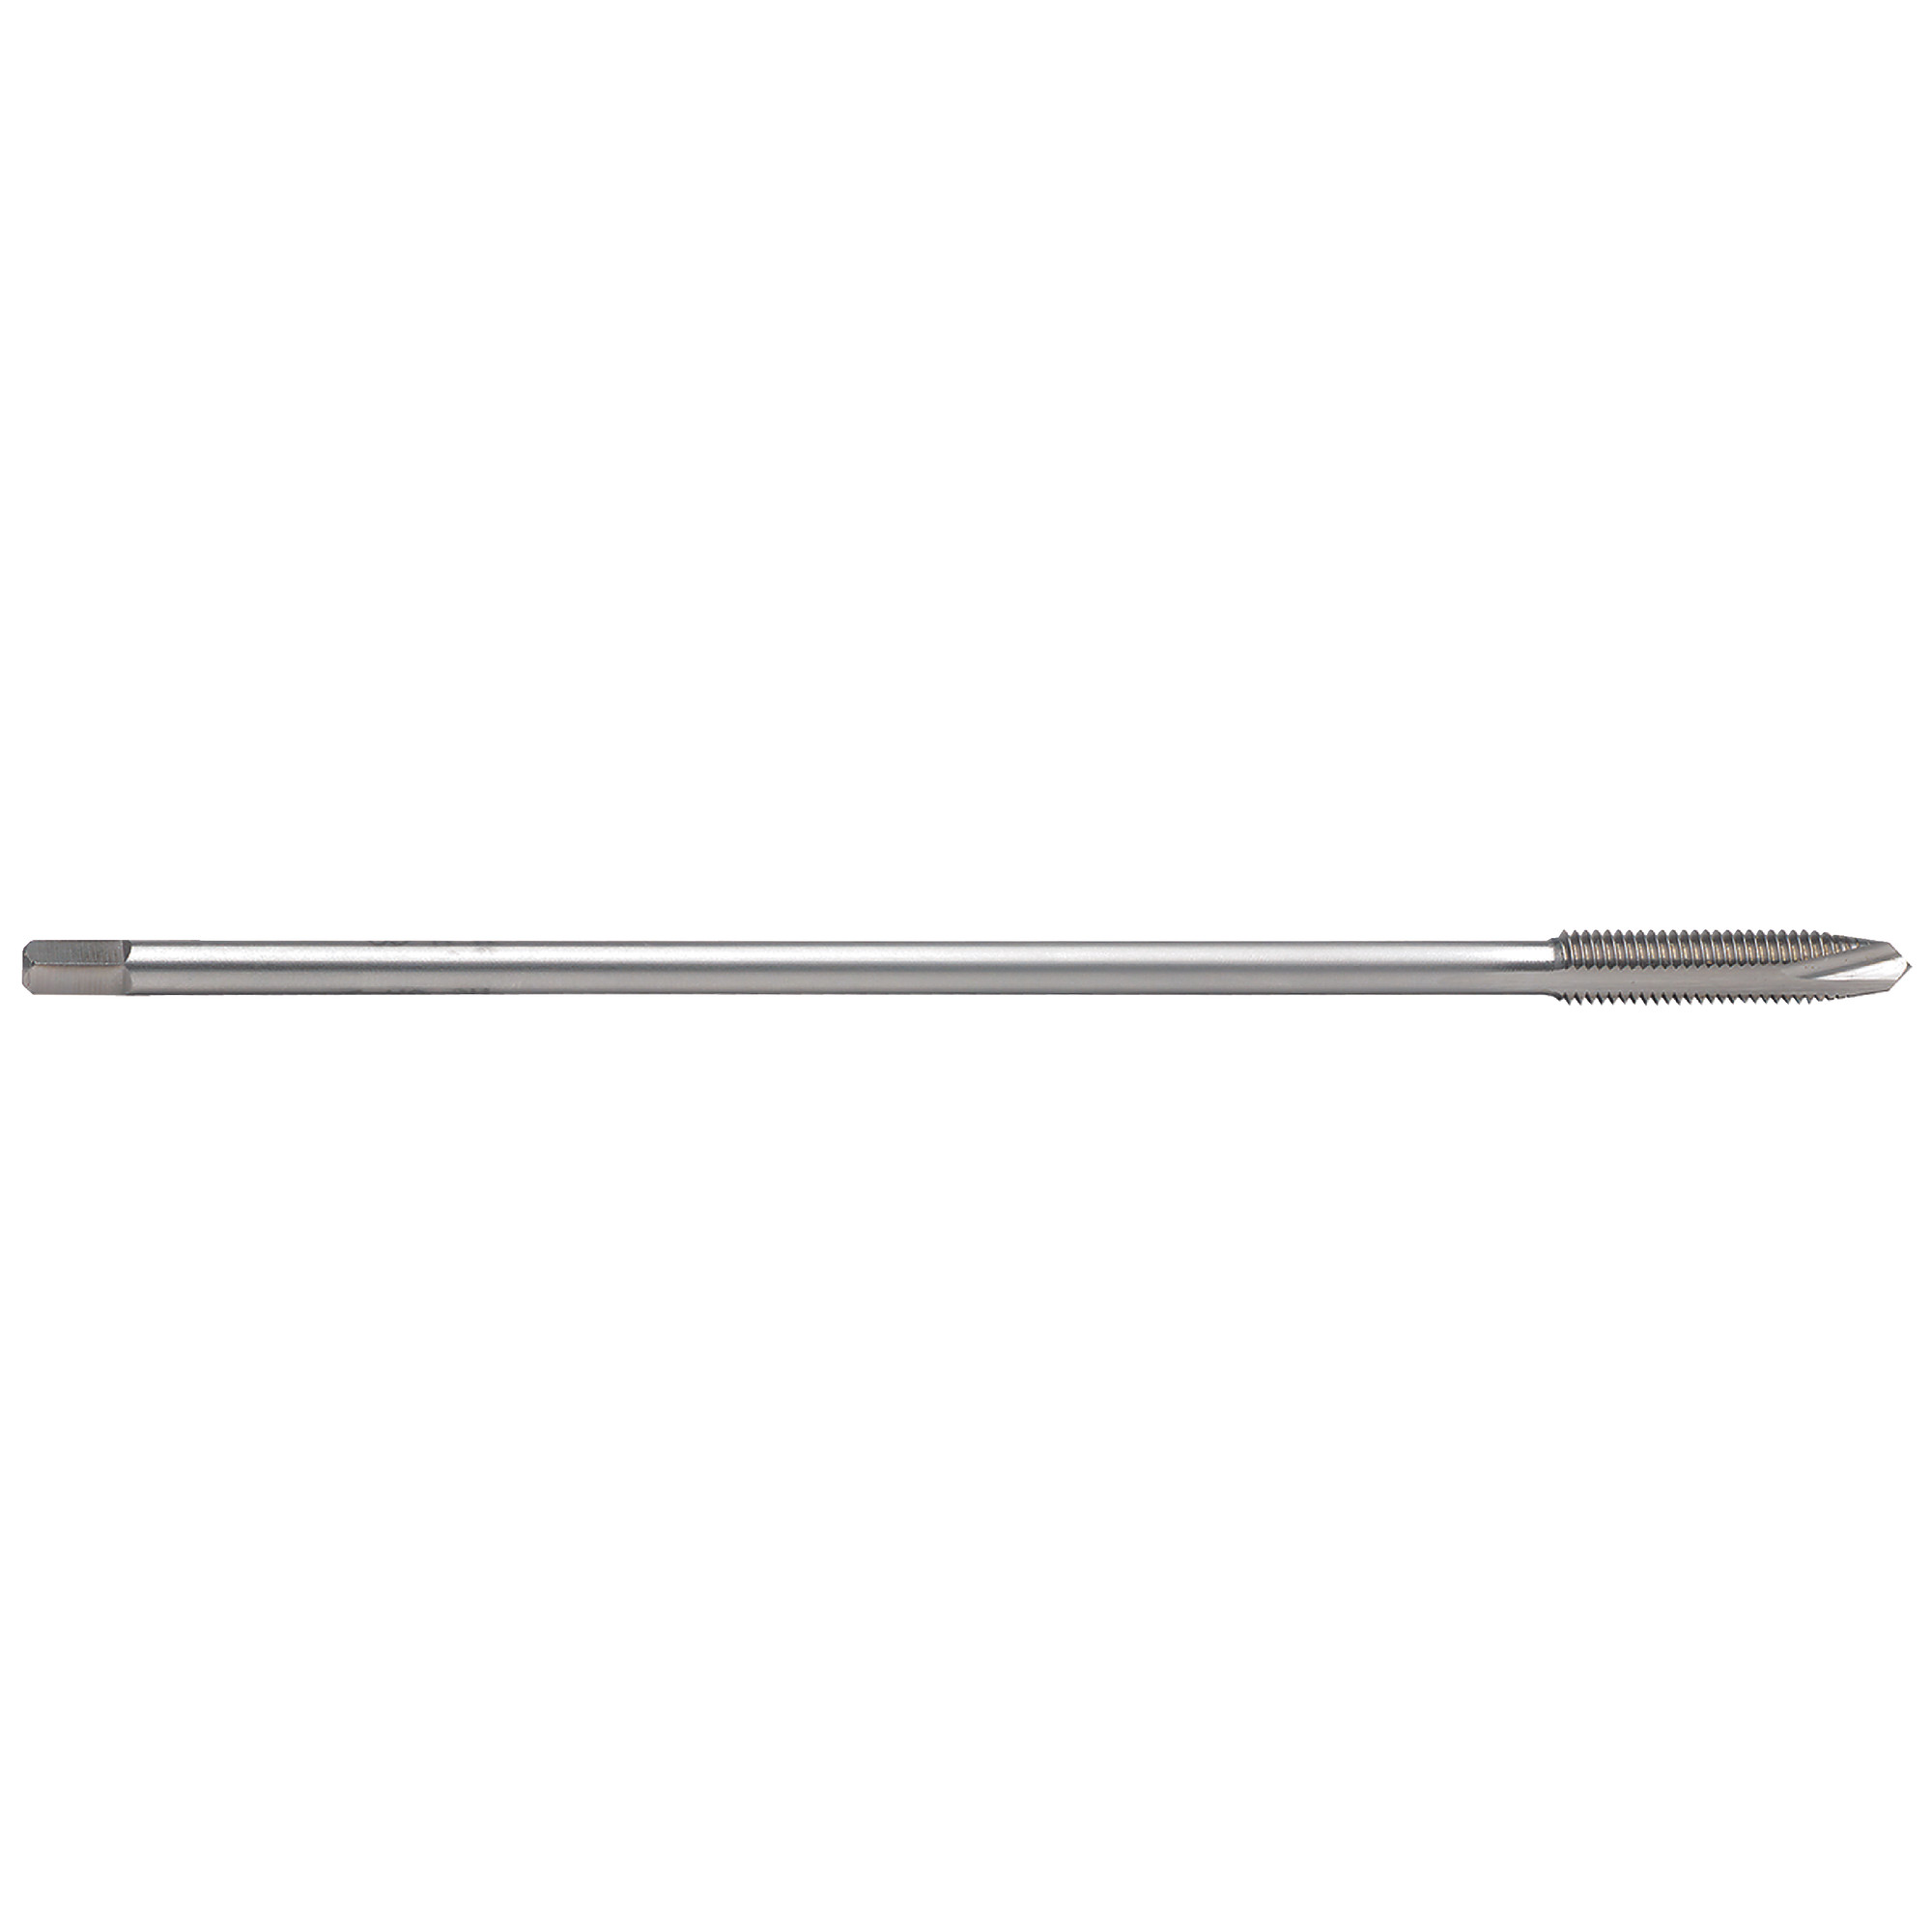 6" High Speed Steel Long Reach Extension Plug Taps